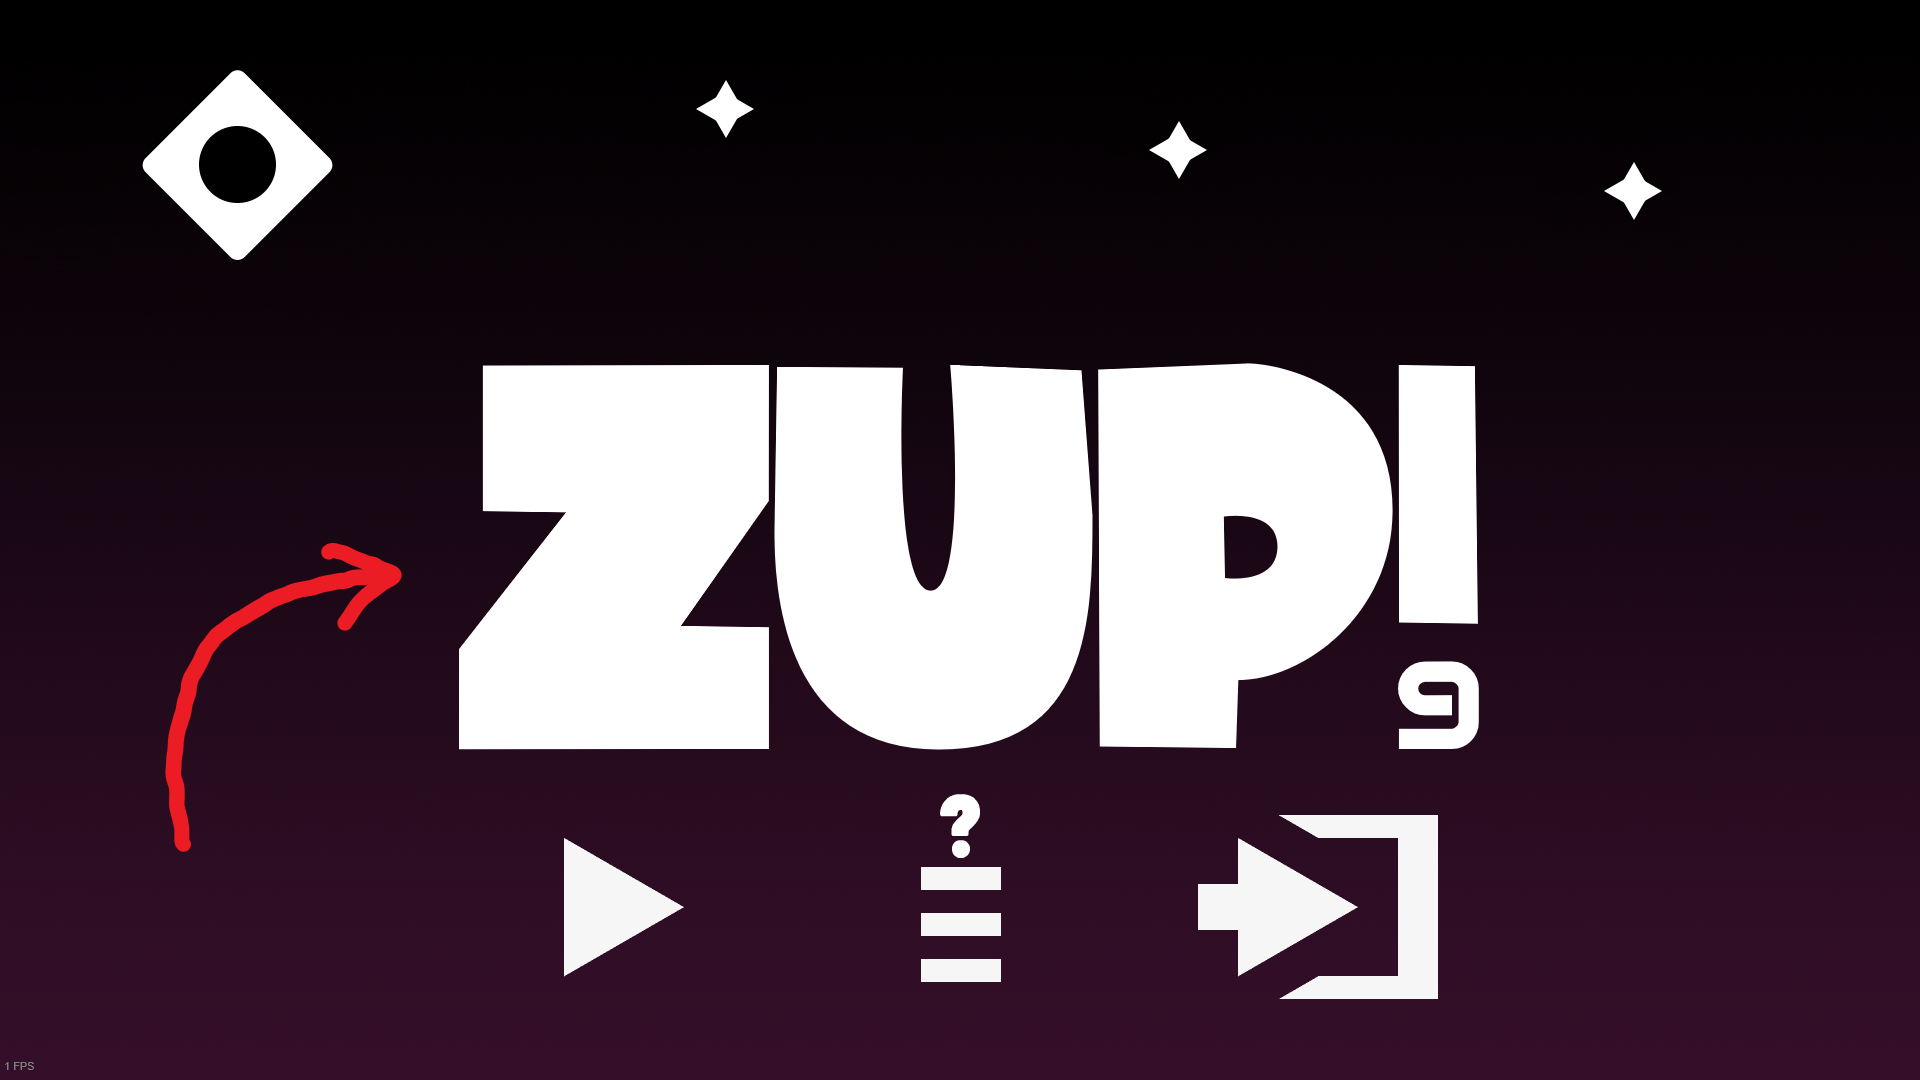 Zup! 9 Getting all Achievements